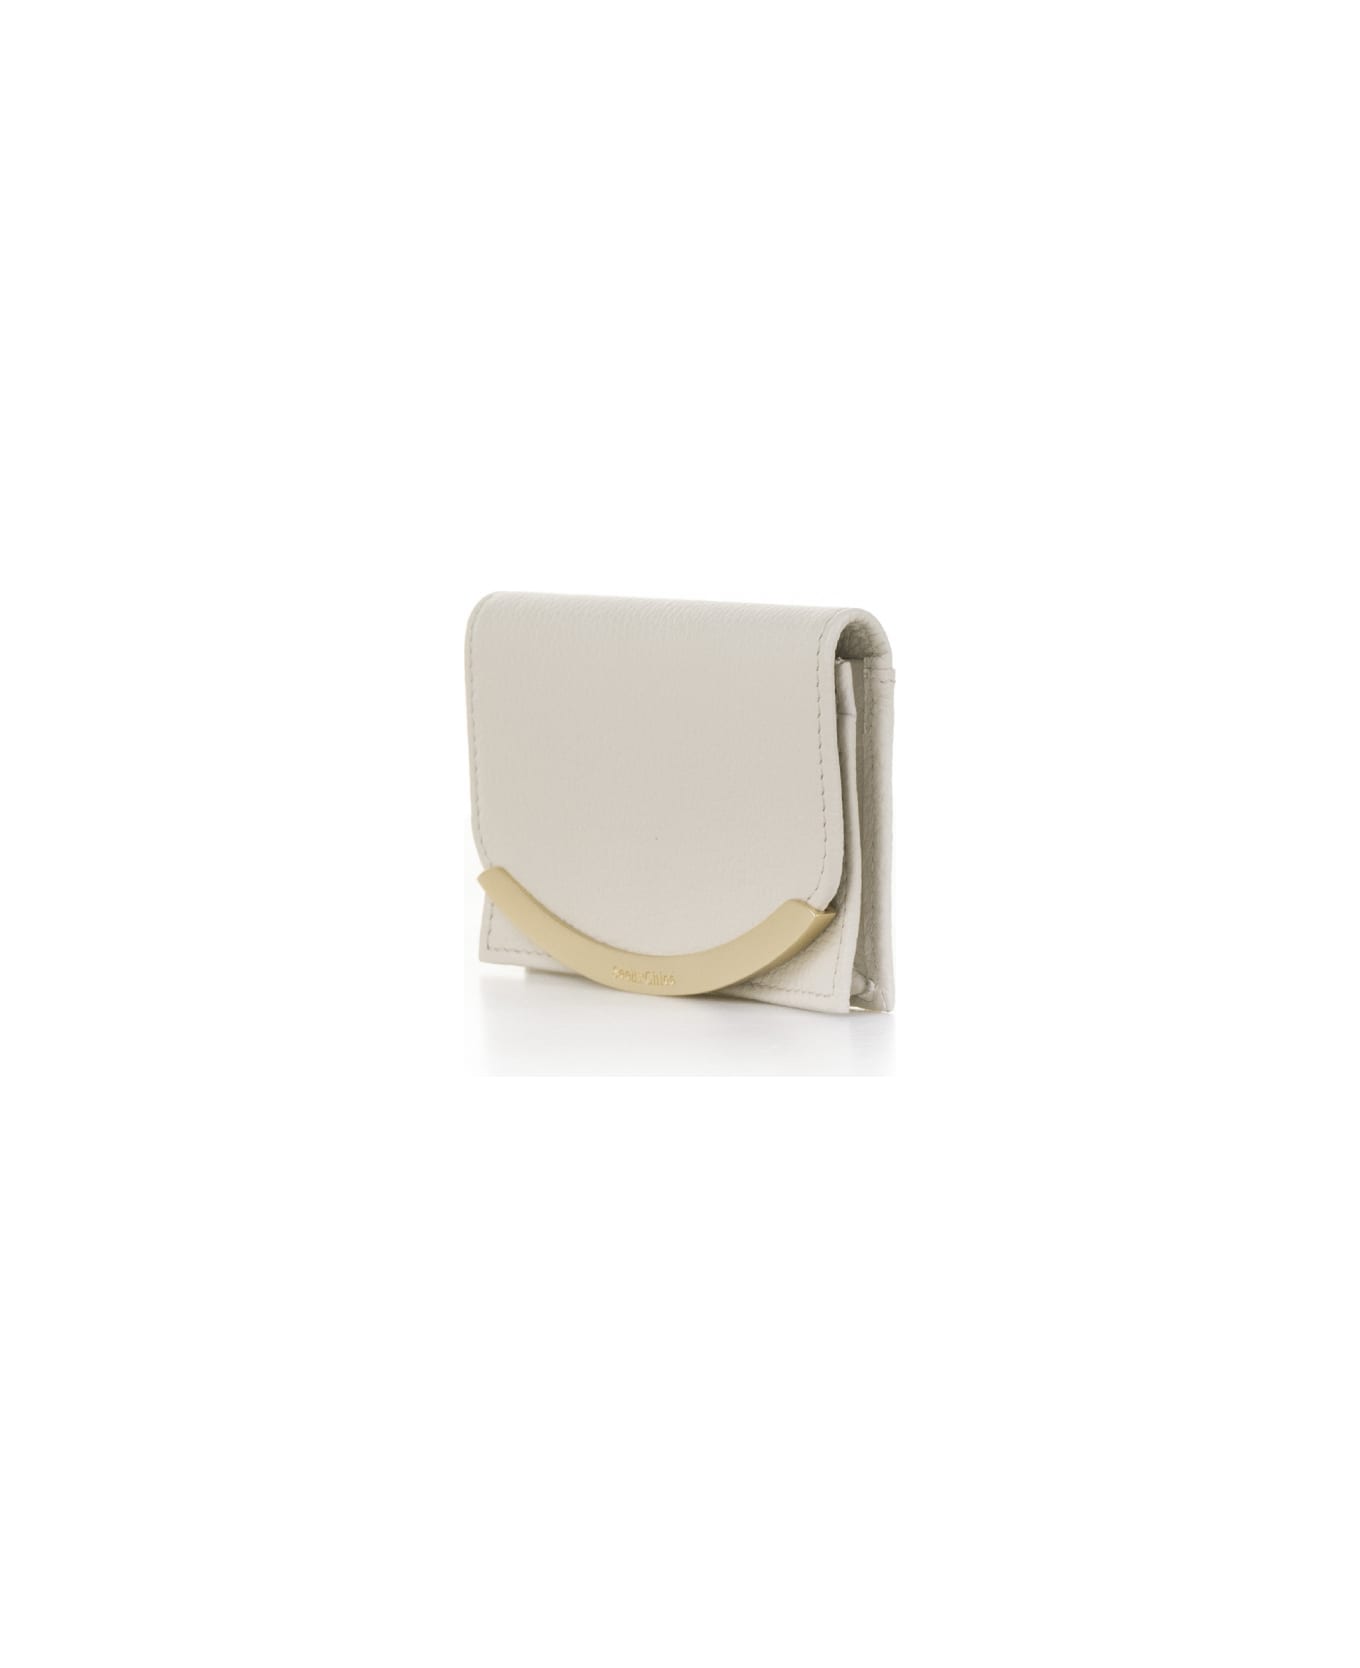 See by Chloé Wallet - CEMENT BEIGE 財布